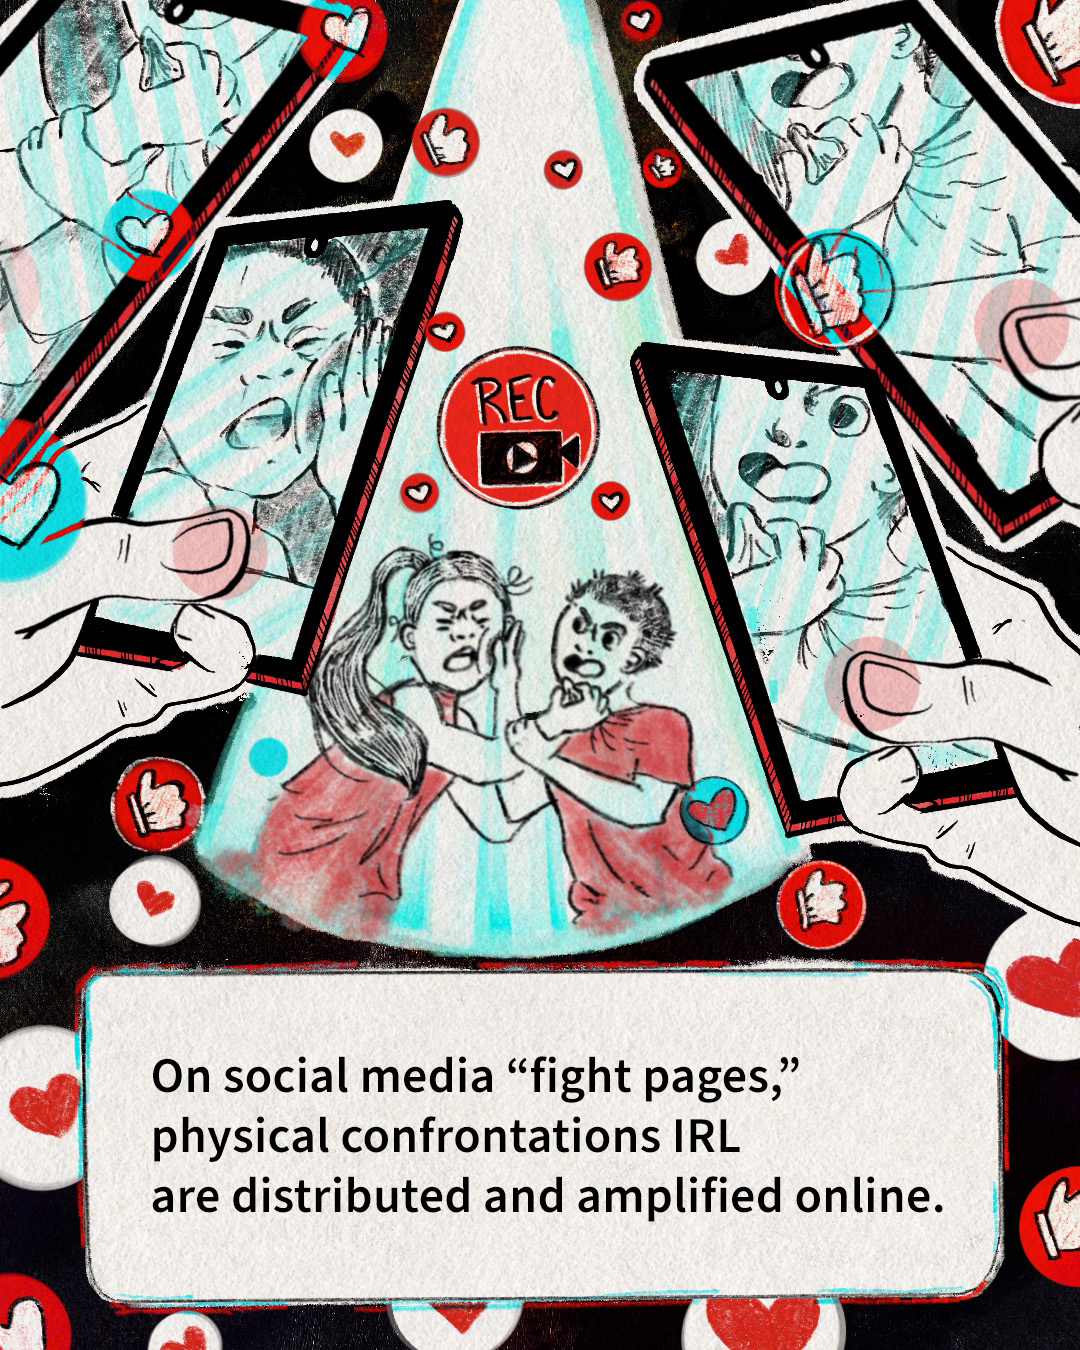 In the center of the image, two teens are having a physical fight. All around them, hands hold up cellphones, recording their fight. Heart and thumbs-up emojis bubble up around them. On the bottom of the image, text reads: “On social media ‘fight pages,’ physical confrontations IRL are distributed and amplified online.”